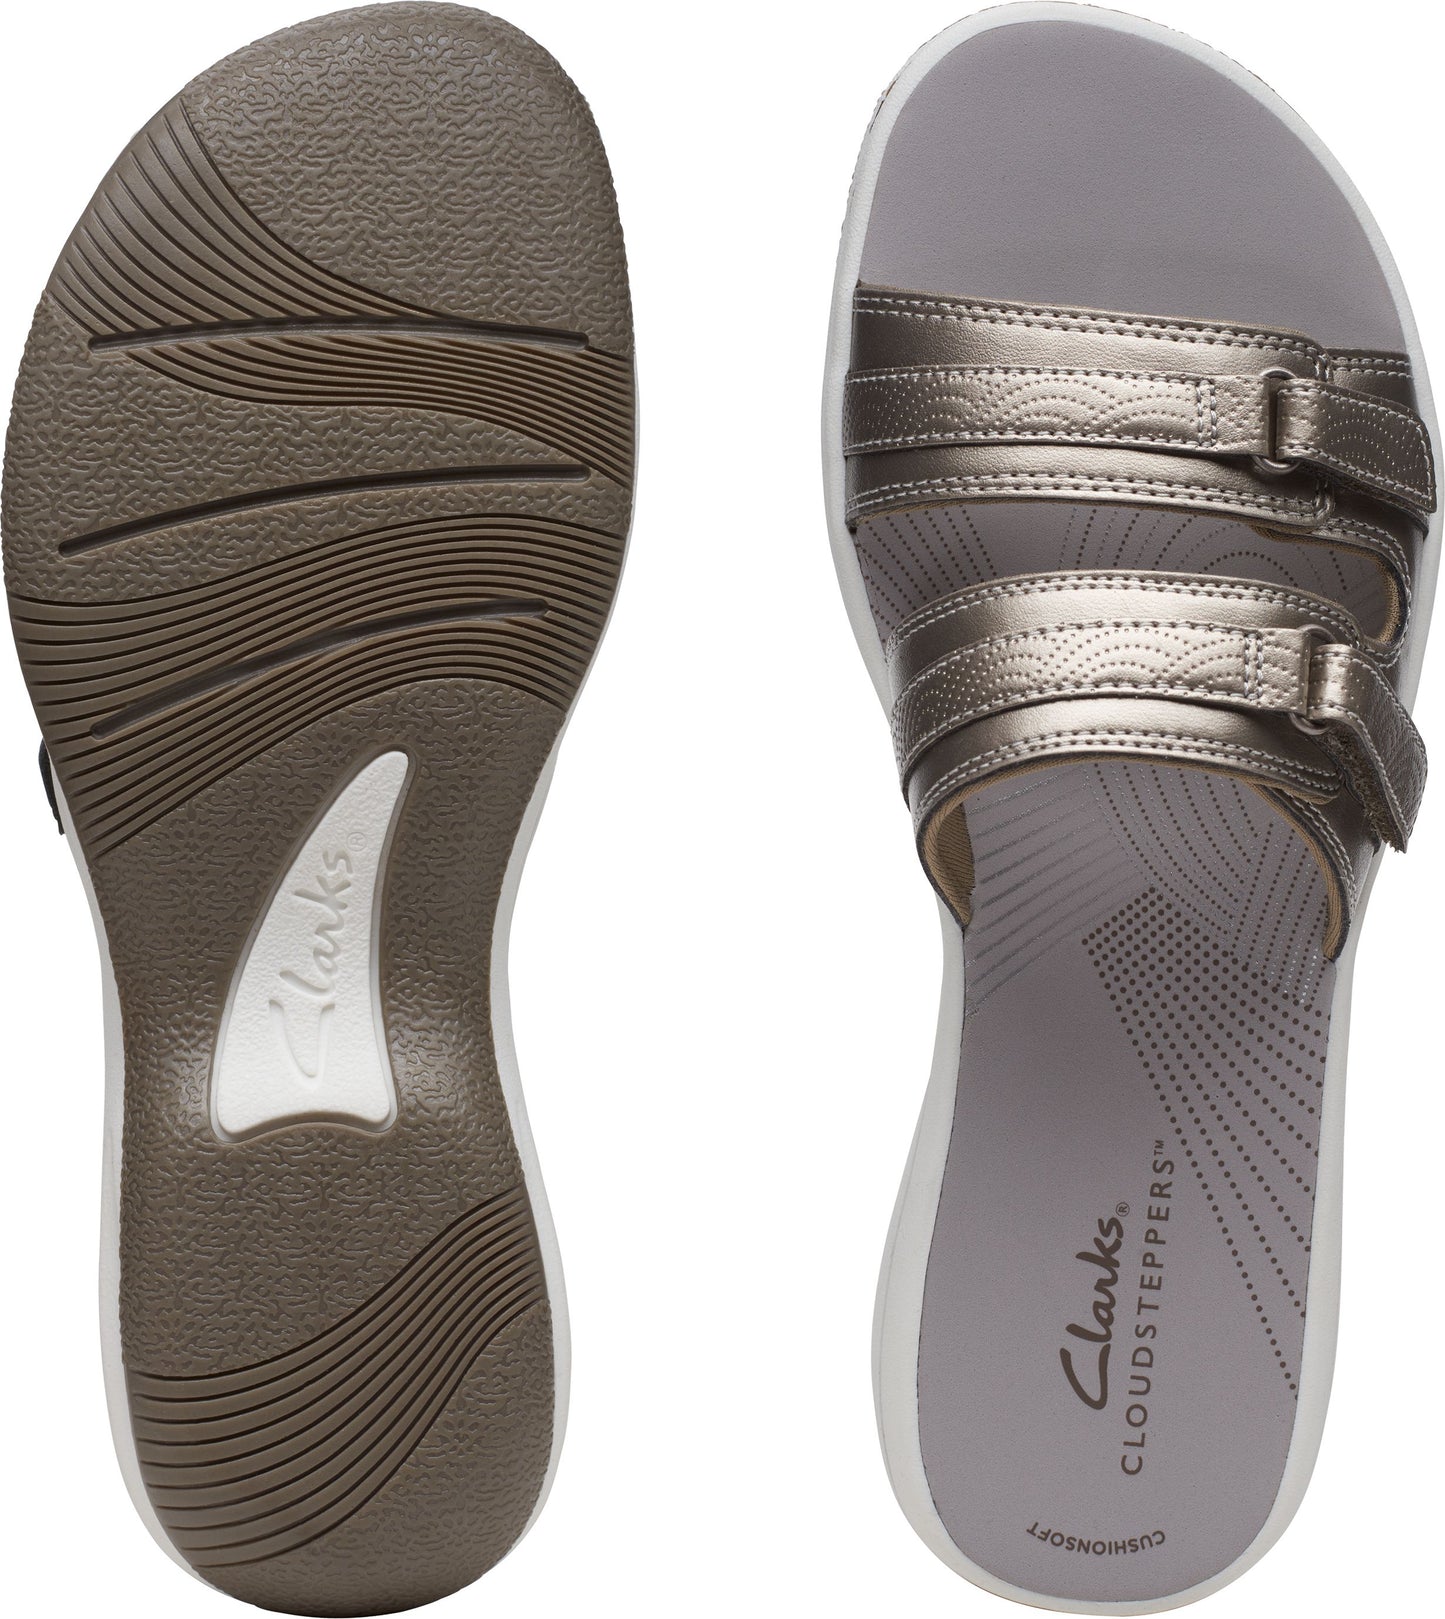 Clarks Sandals Breeze Piper Pewter